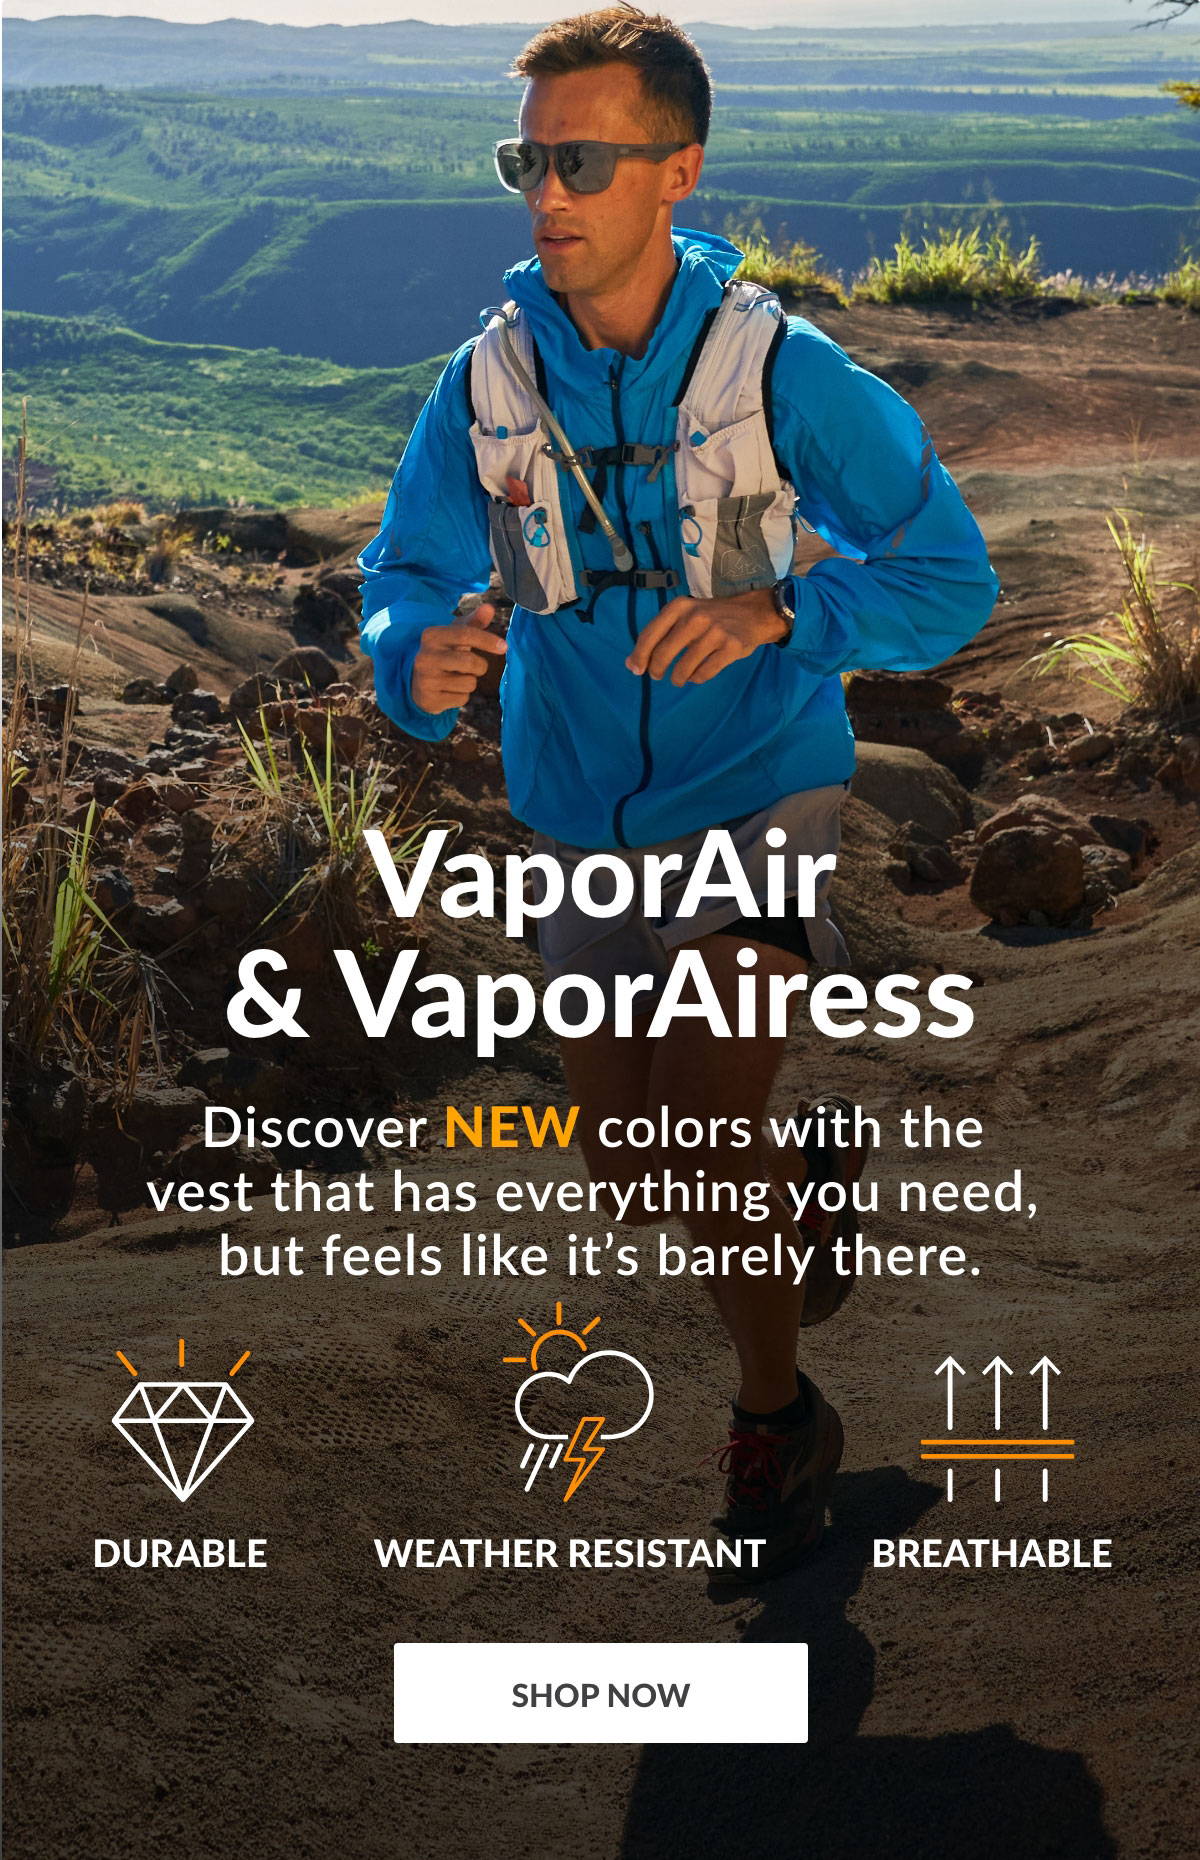 VaporAir & VaporAiress - Discover NEW Colors With The Hydration Vest That Has Everything You Need, But Feels Like It's Barely There - Durable, Breathable, Weather Resistant - Shop Now